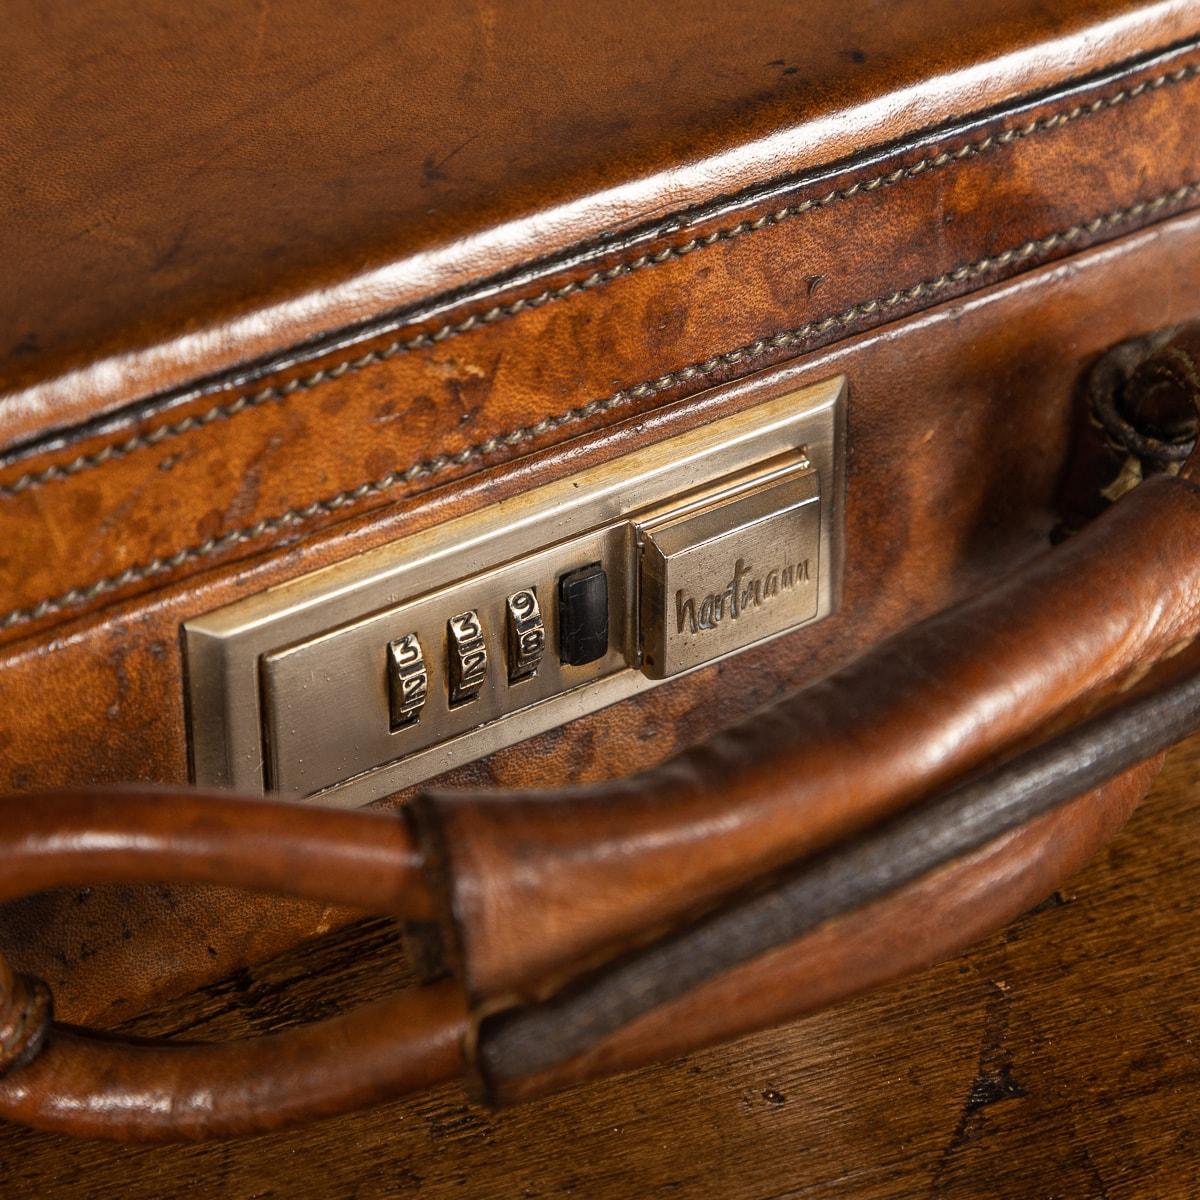 20th Century American Leather Briefcase by Hartmann, circa 1920 For Sale 3